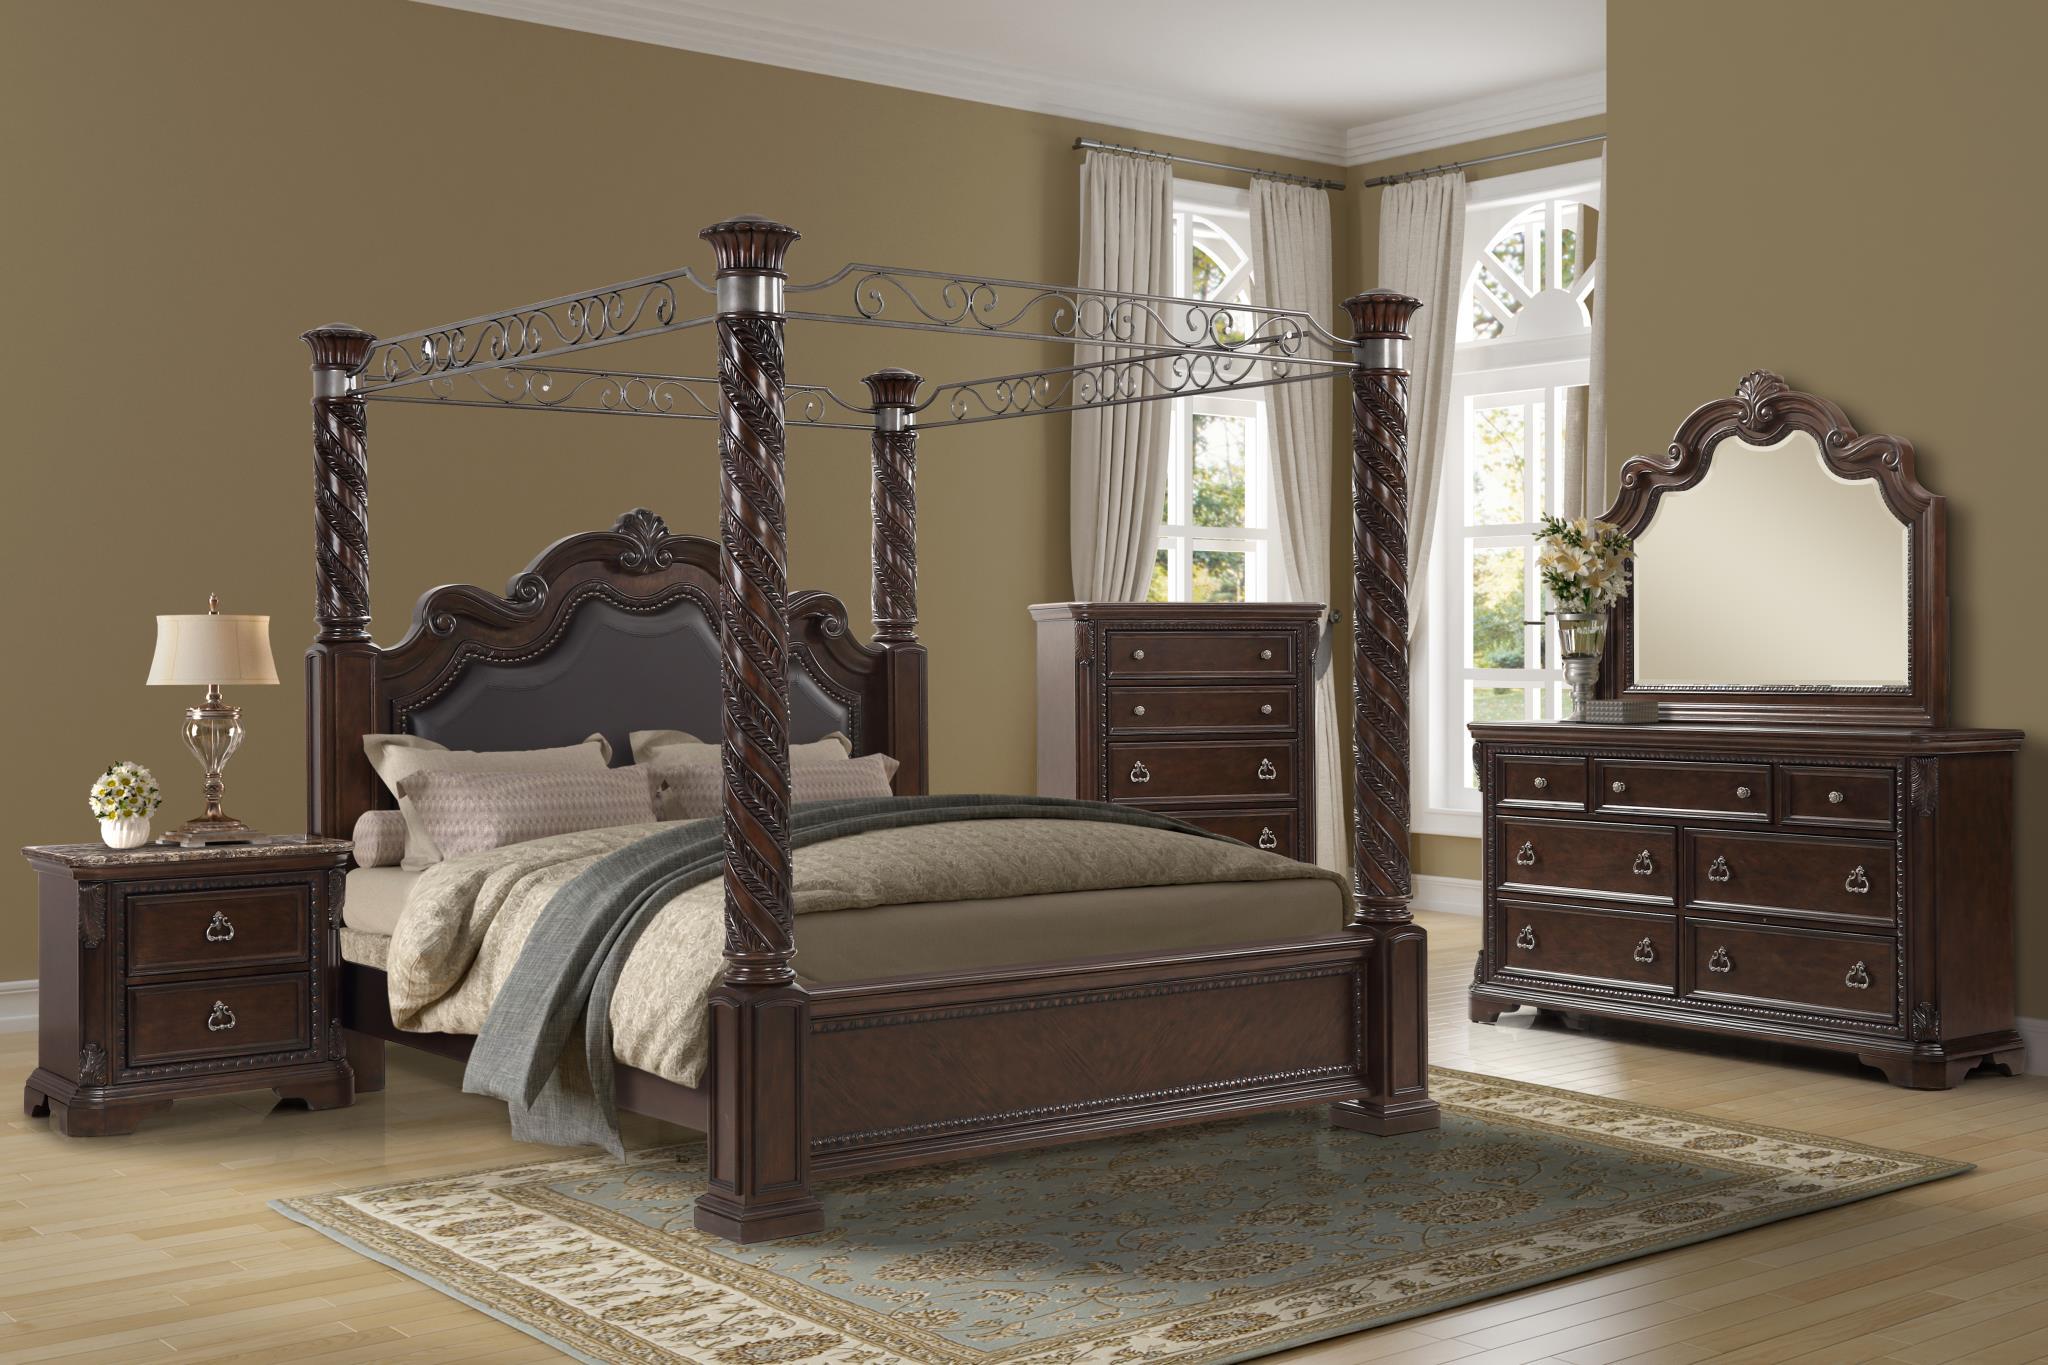 

    
Mahogany Canopy Queen Bed Set 5Ps COVENTRY 1988-108 Bernards Classic Traditional
